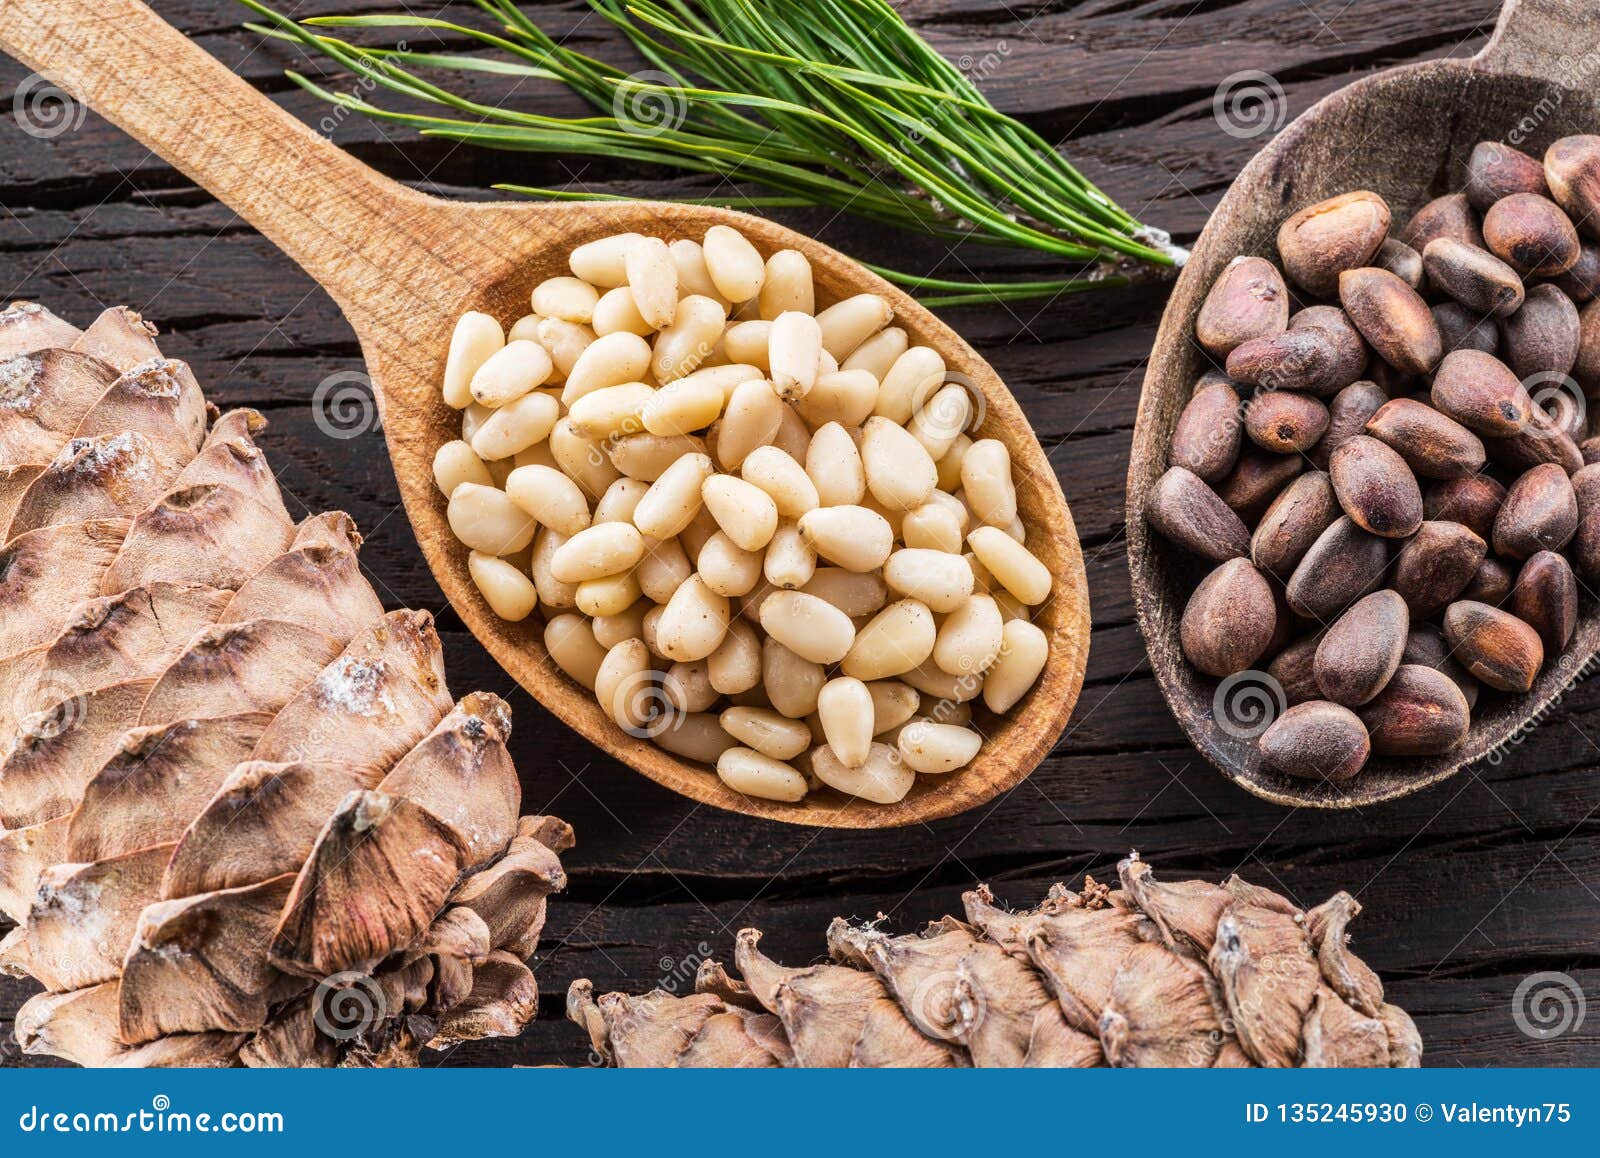 pine nuts in the spoon and pine nut cone on the wooden table. organic food